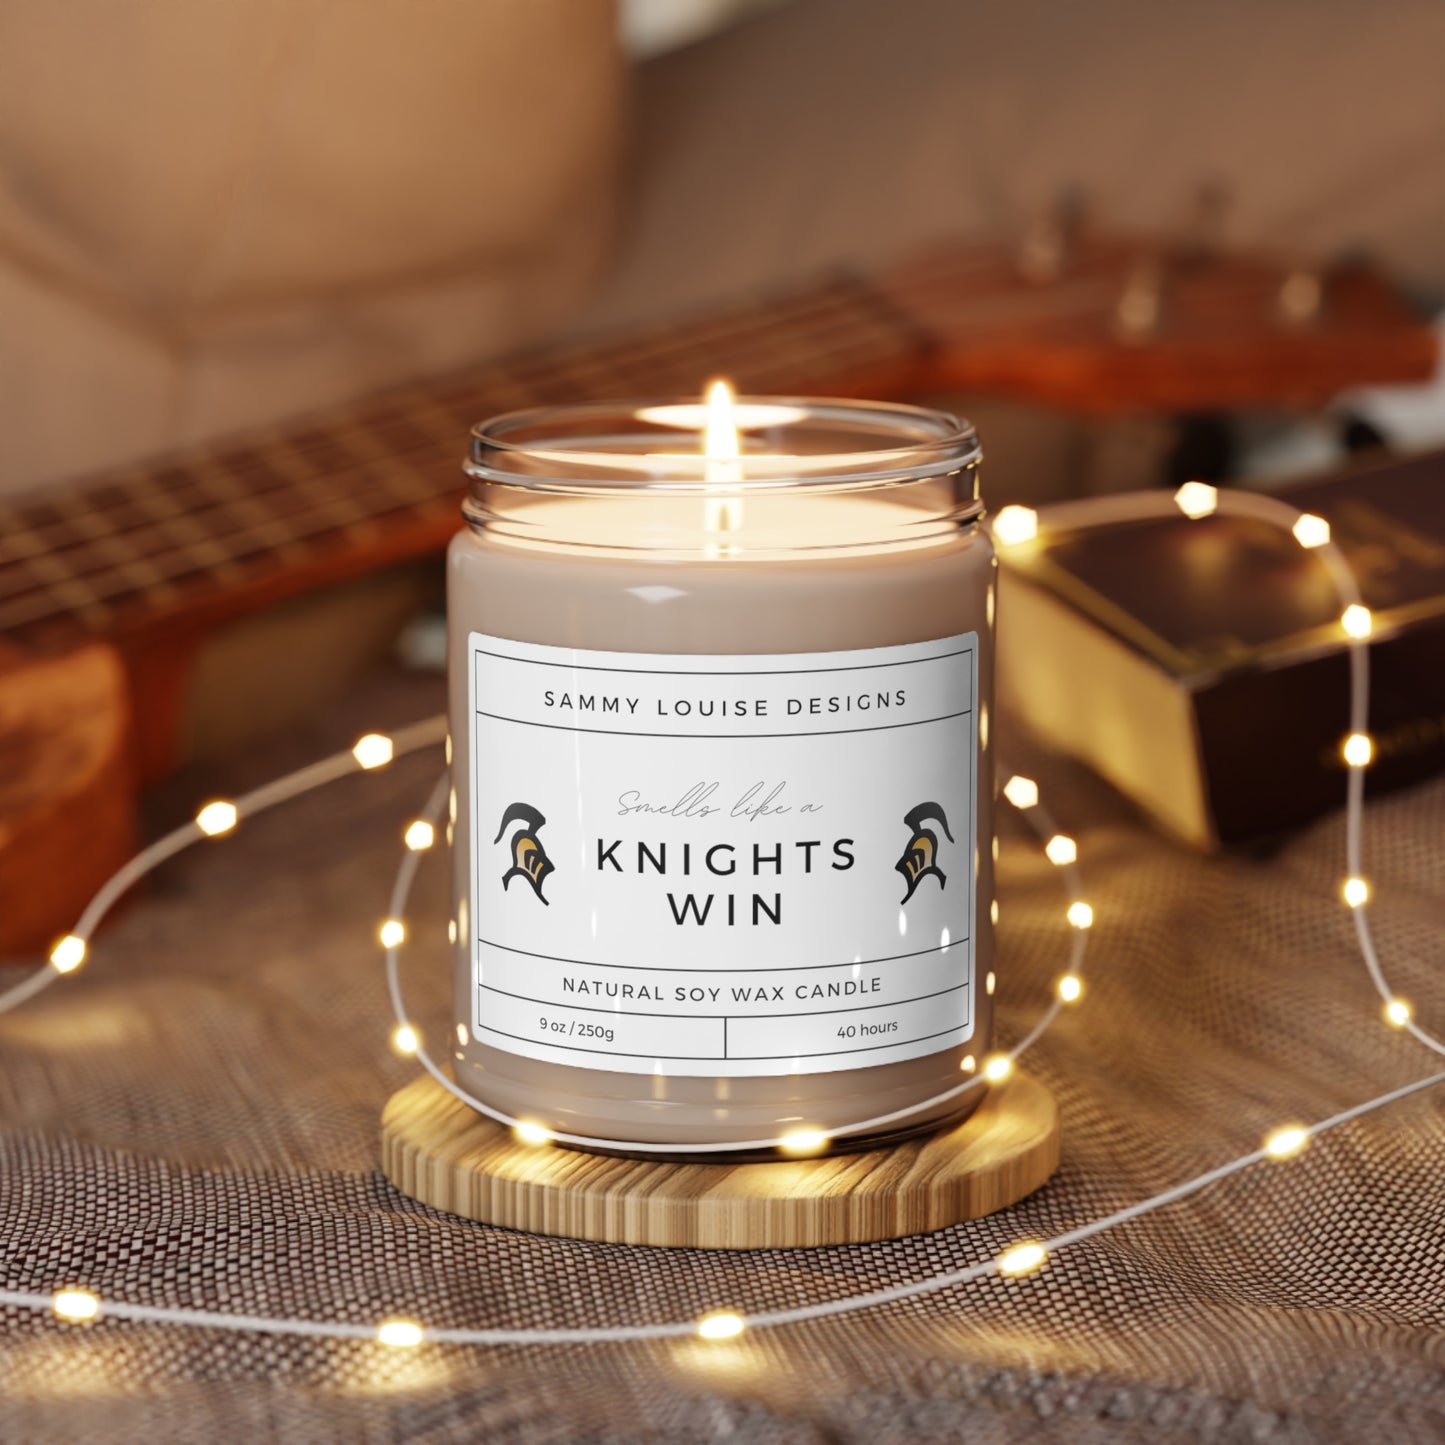 Smells like a Knights Win Scented Soy Candle, 9oz